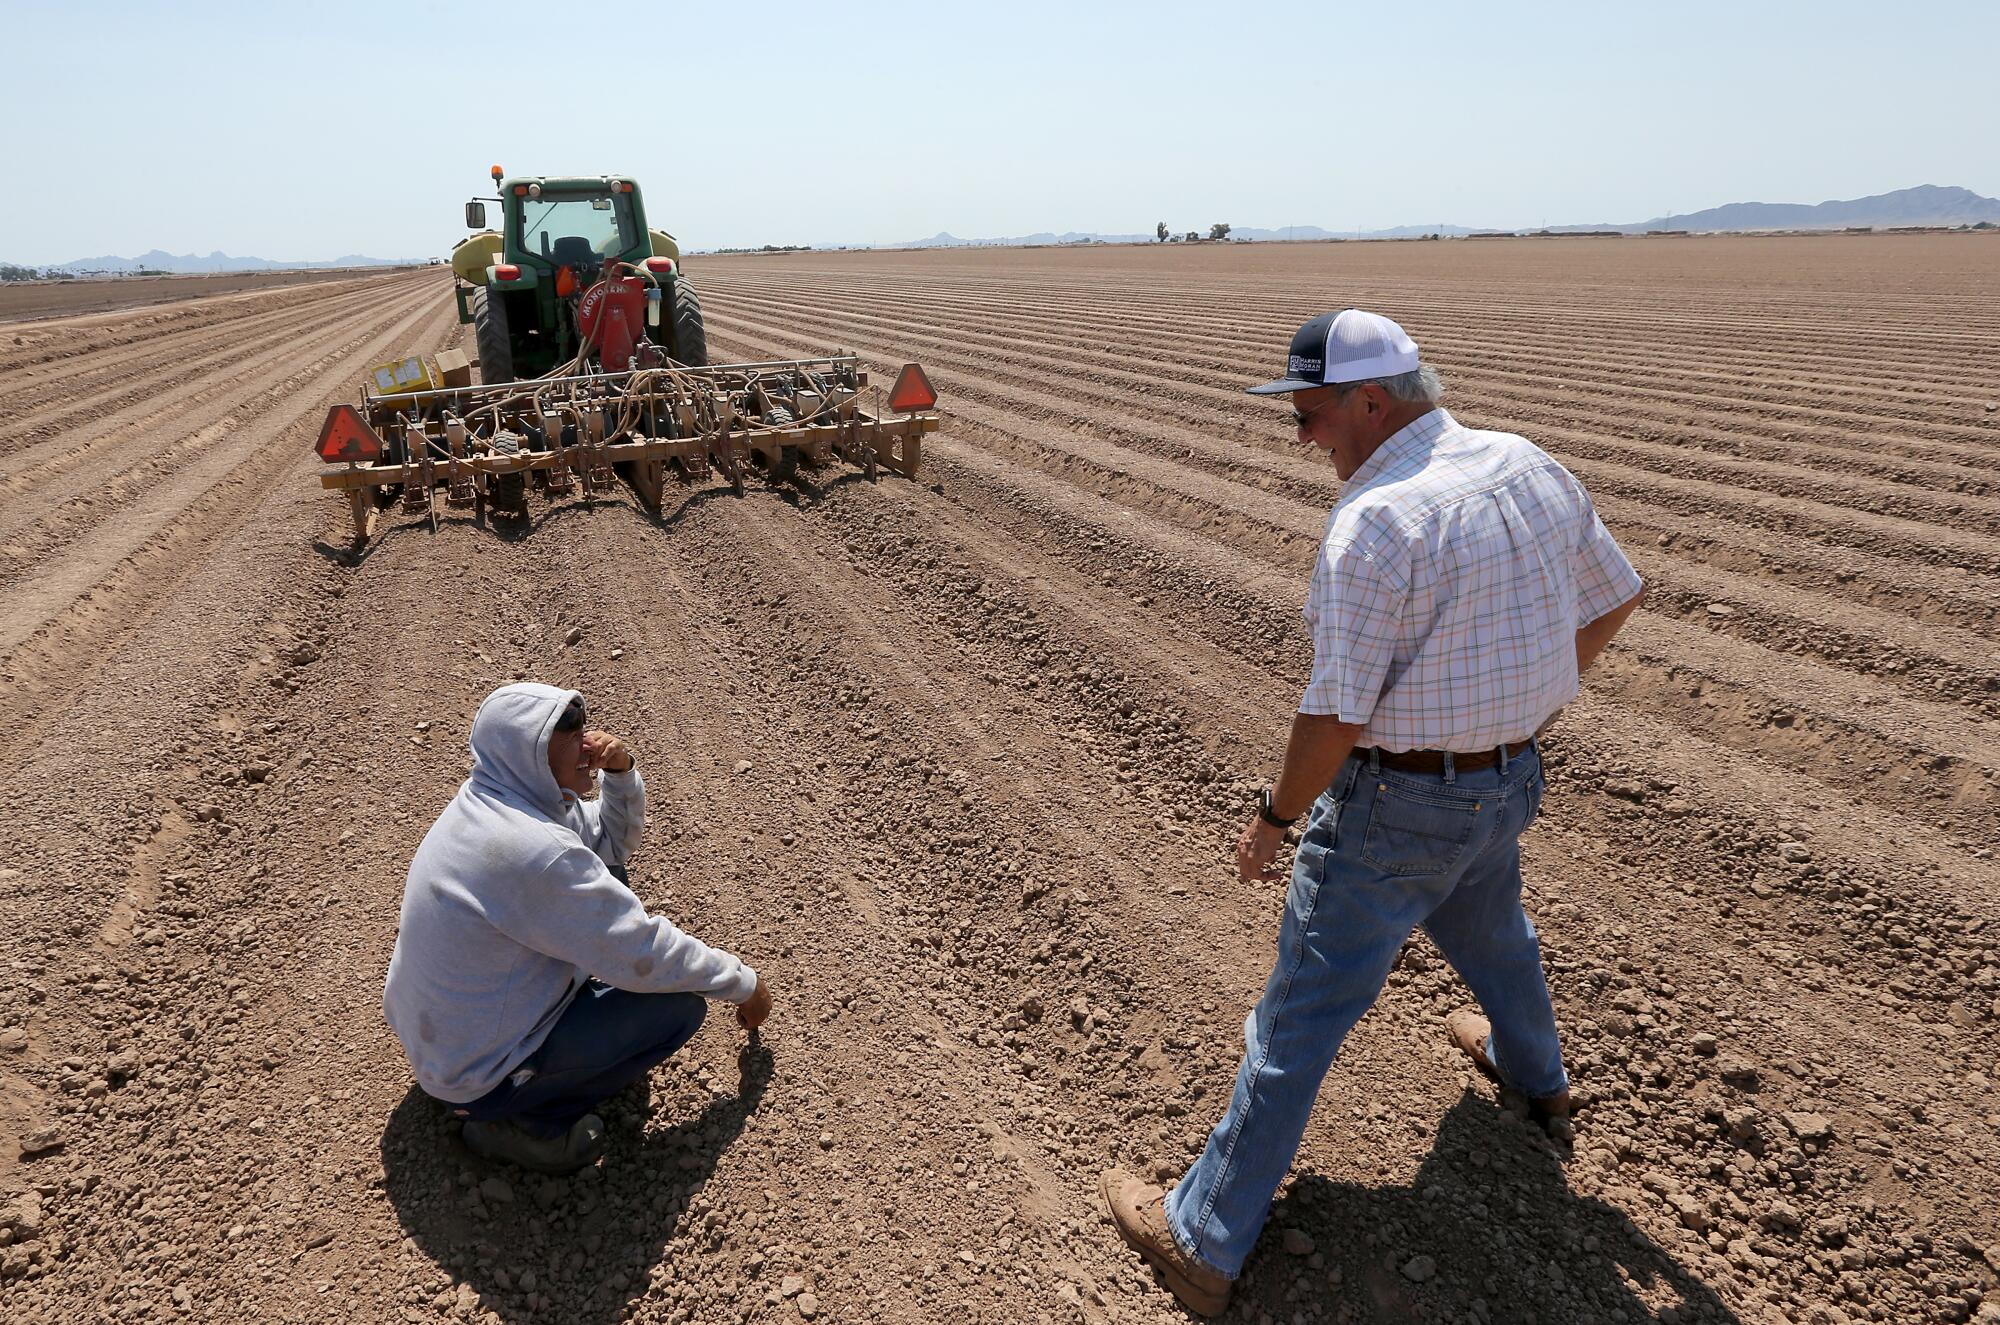 Farmer Bart Fisher shares a laugh with a worker while looking over seeding operations at one of his fields in Blythe.